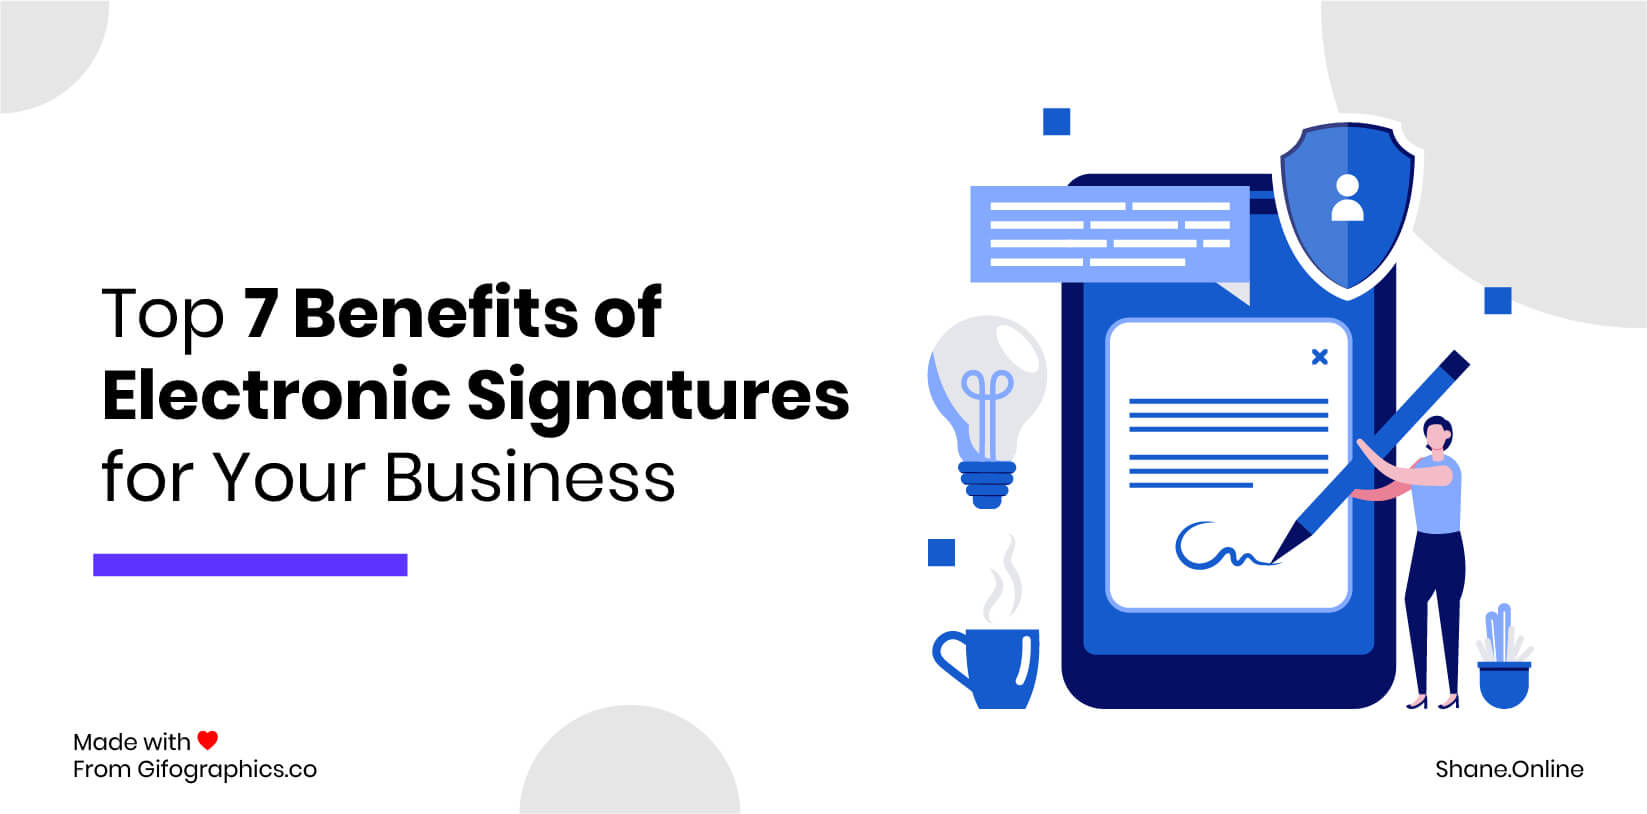 Top 7 Benefits of Electronic Signatures for Your Business